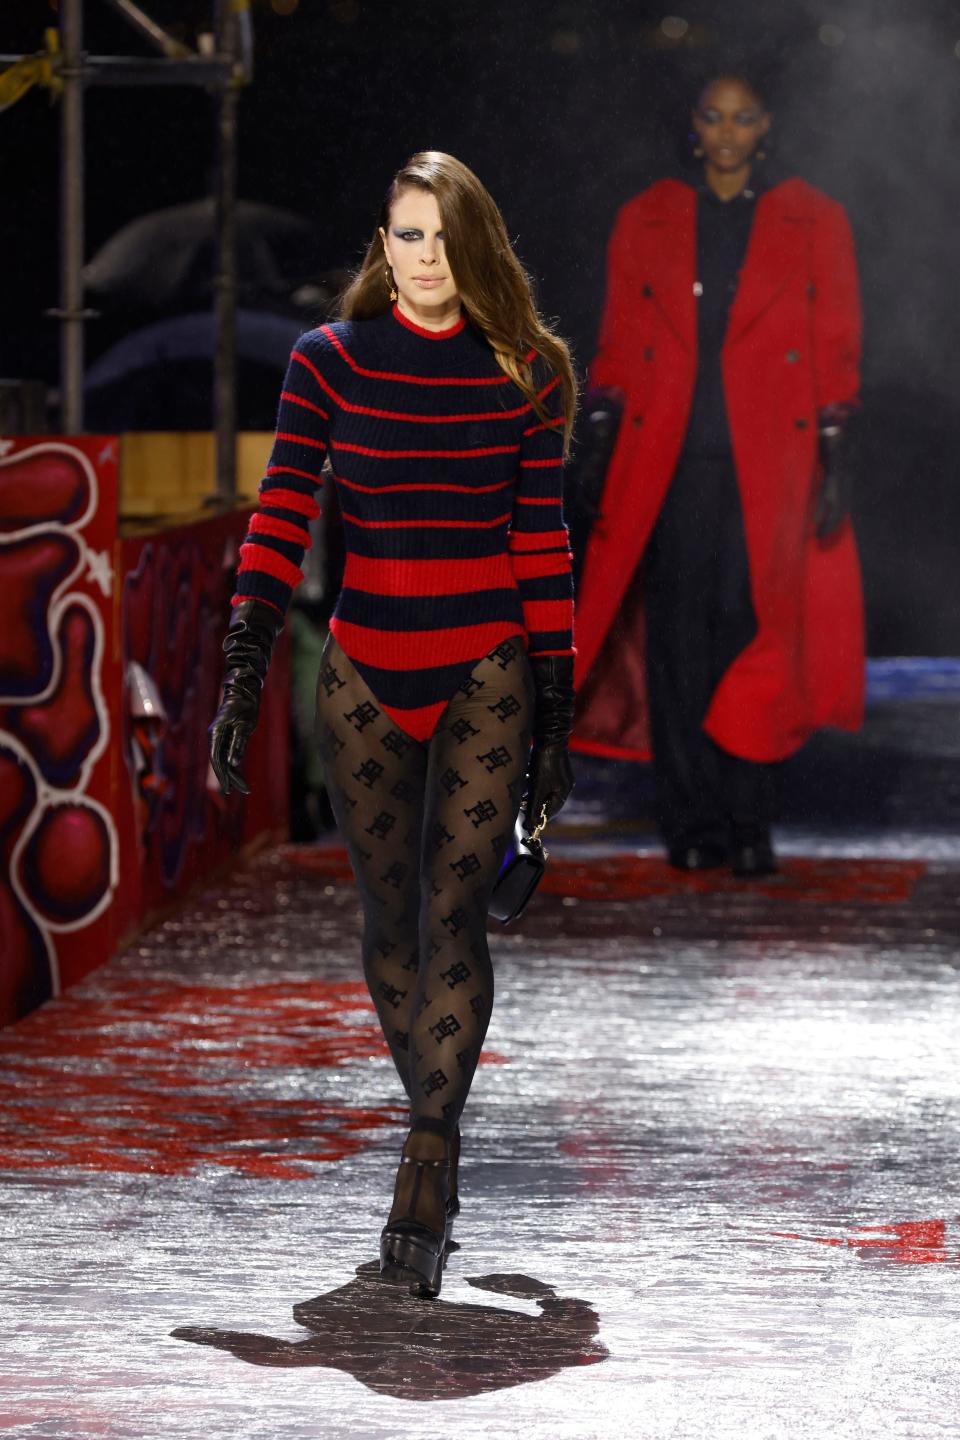 Julia Fox walked the runway for Tommy Hilfiger's return to New York Fashion Week.